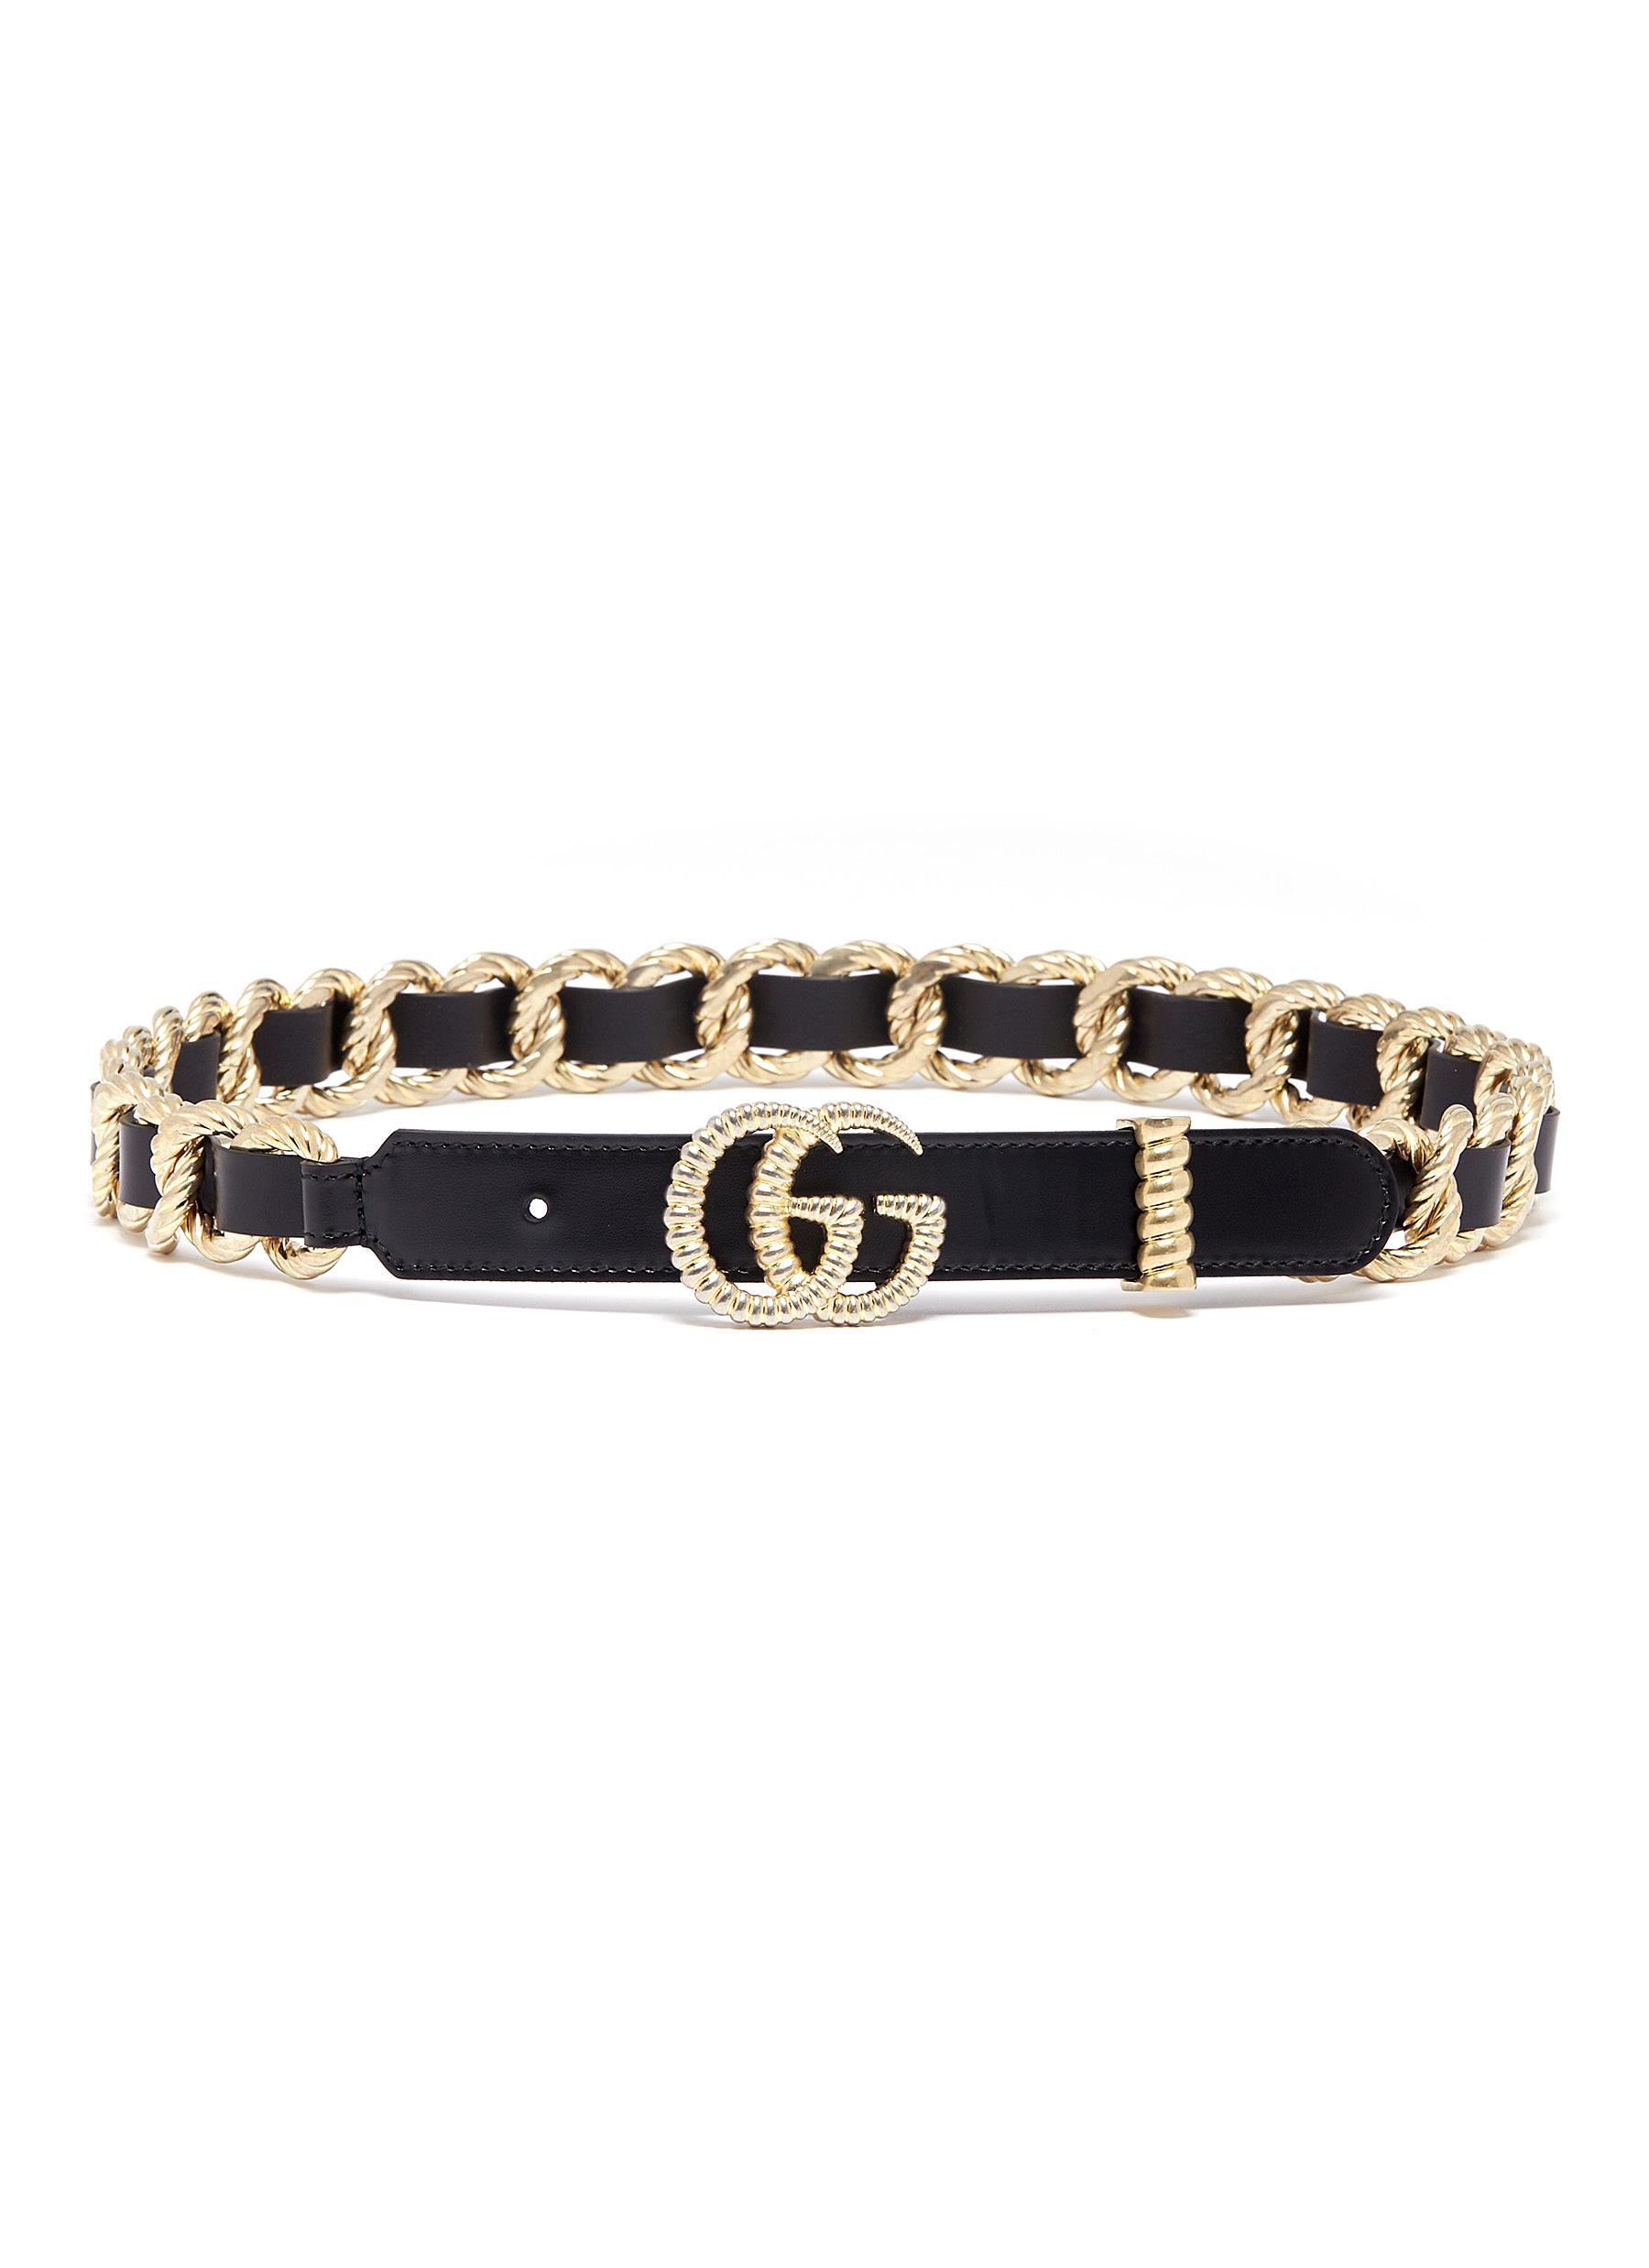 Gucci GG Logo Torchon Chain Leather Belt in Black - Lyst